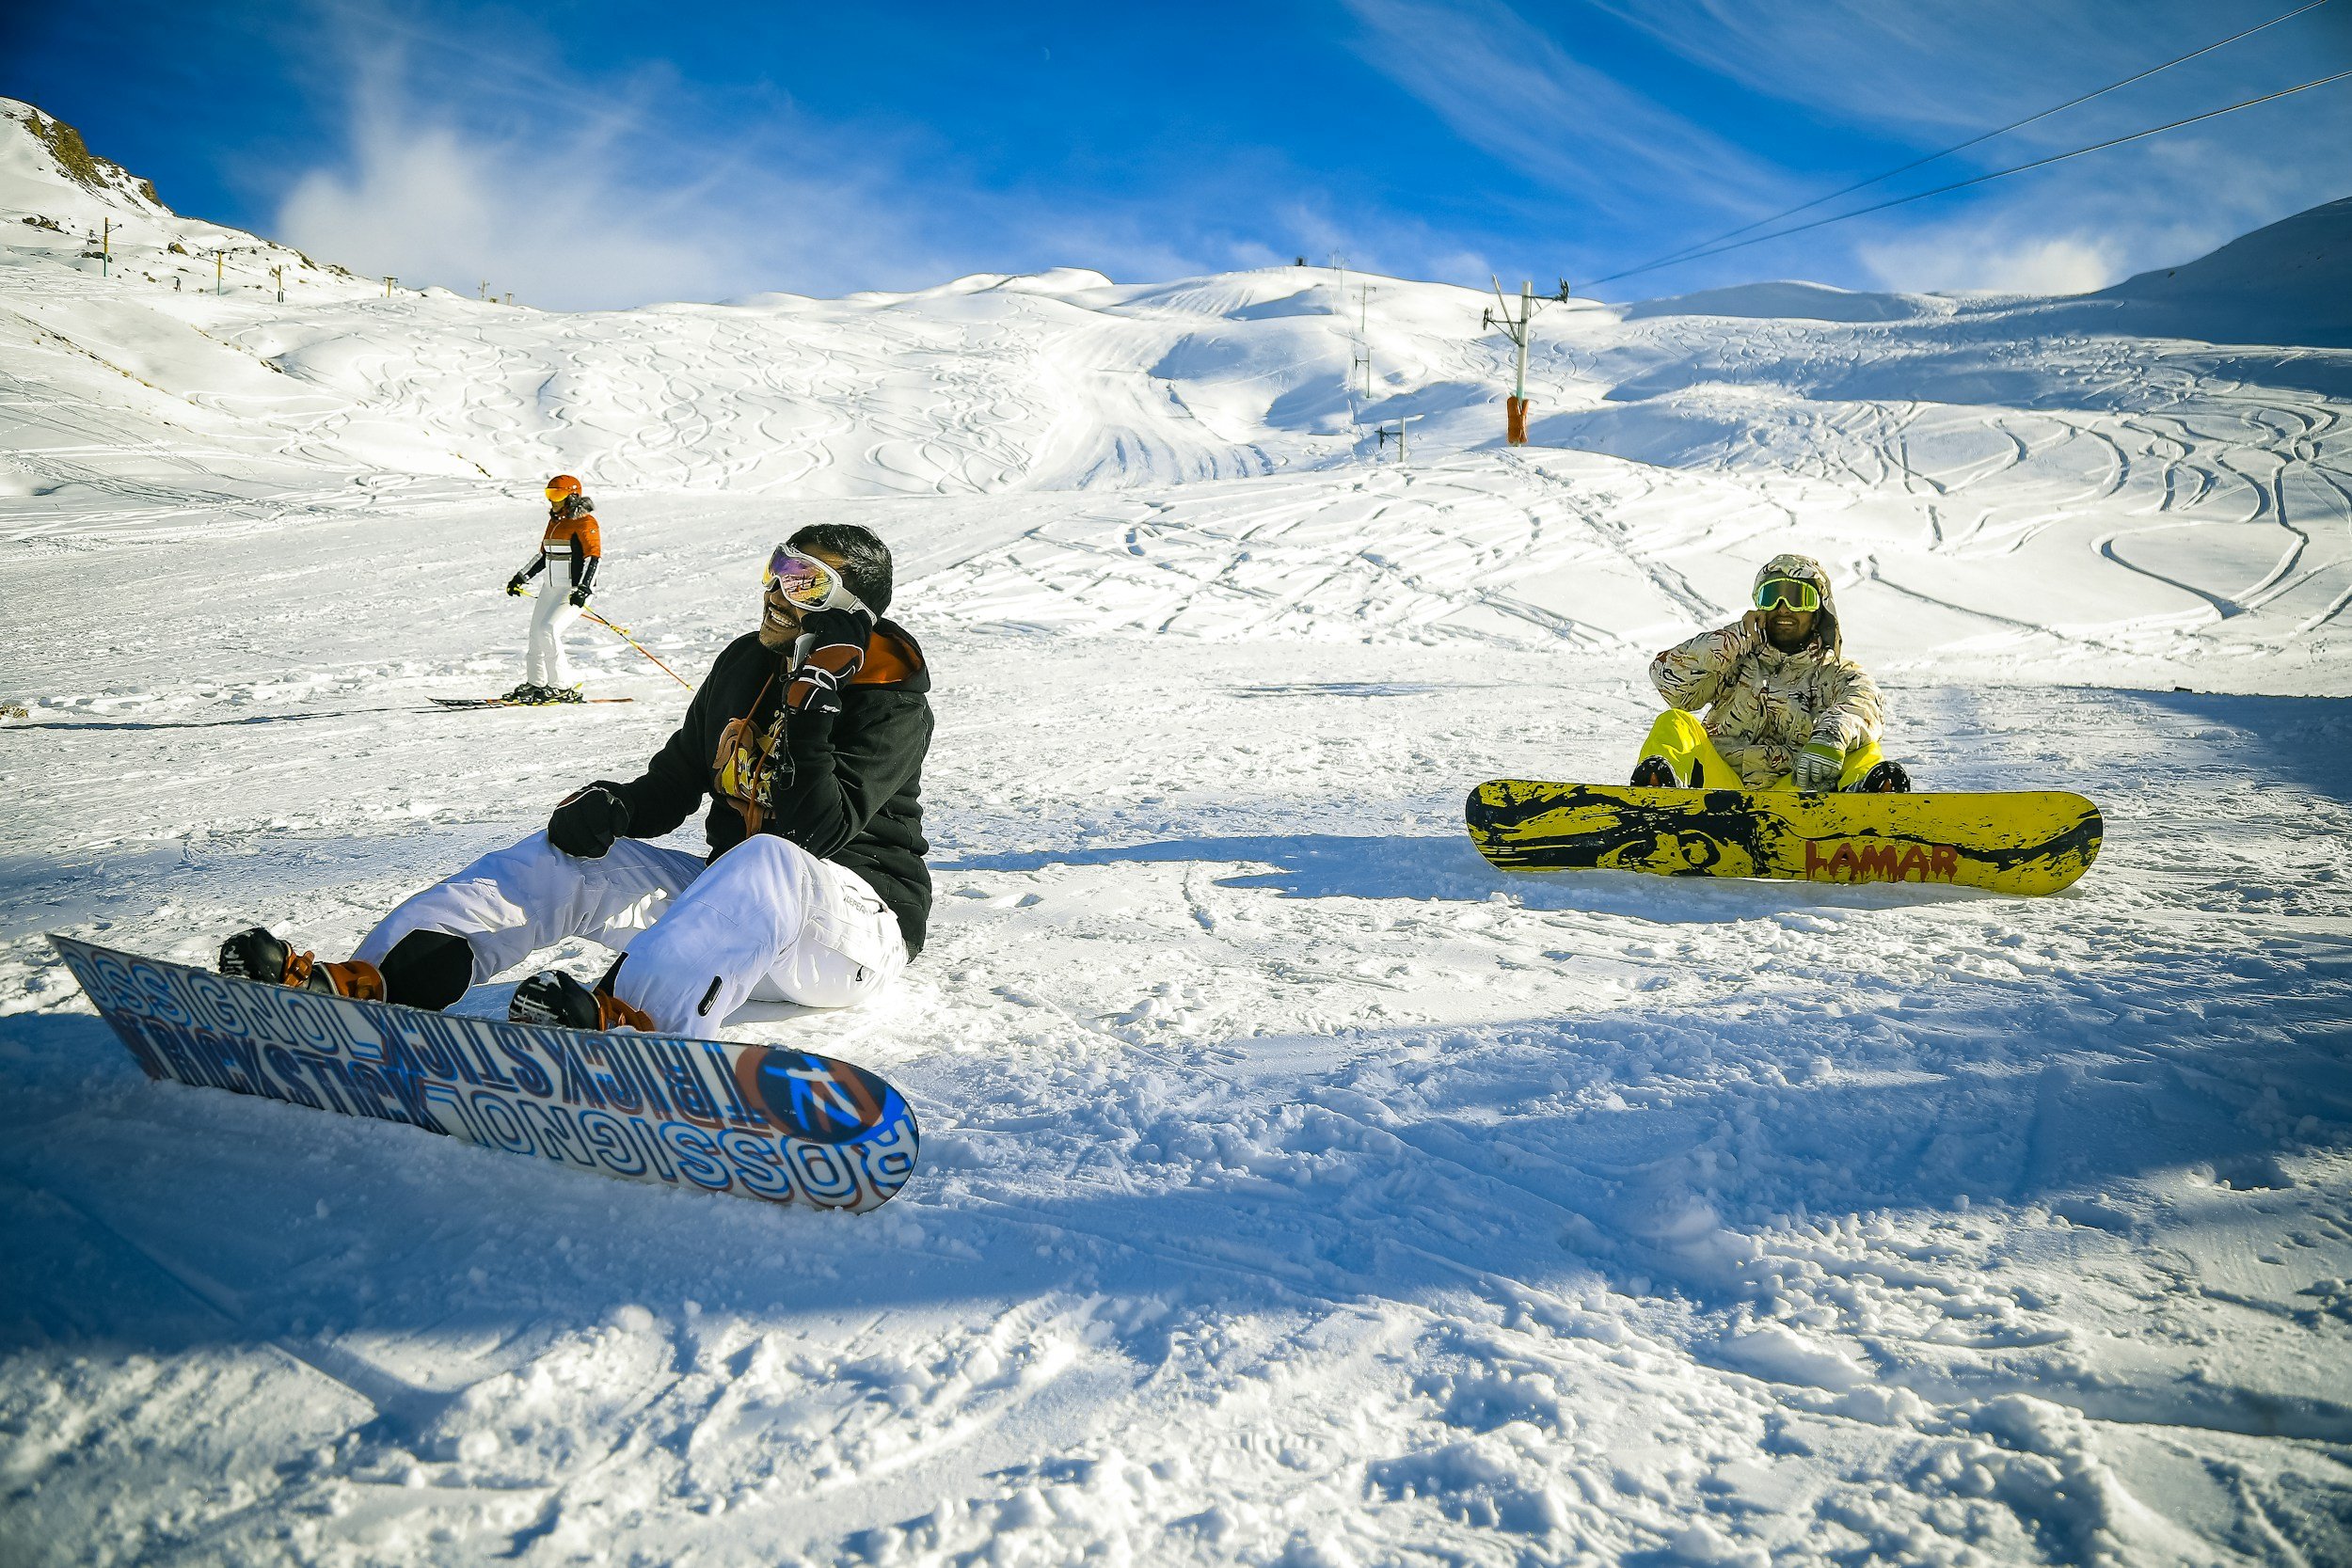 Snowboarding lessons for your employees at a company retreat in the mountains in a luxury chalet